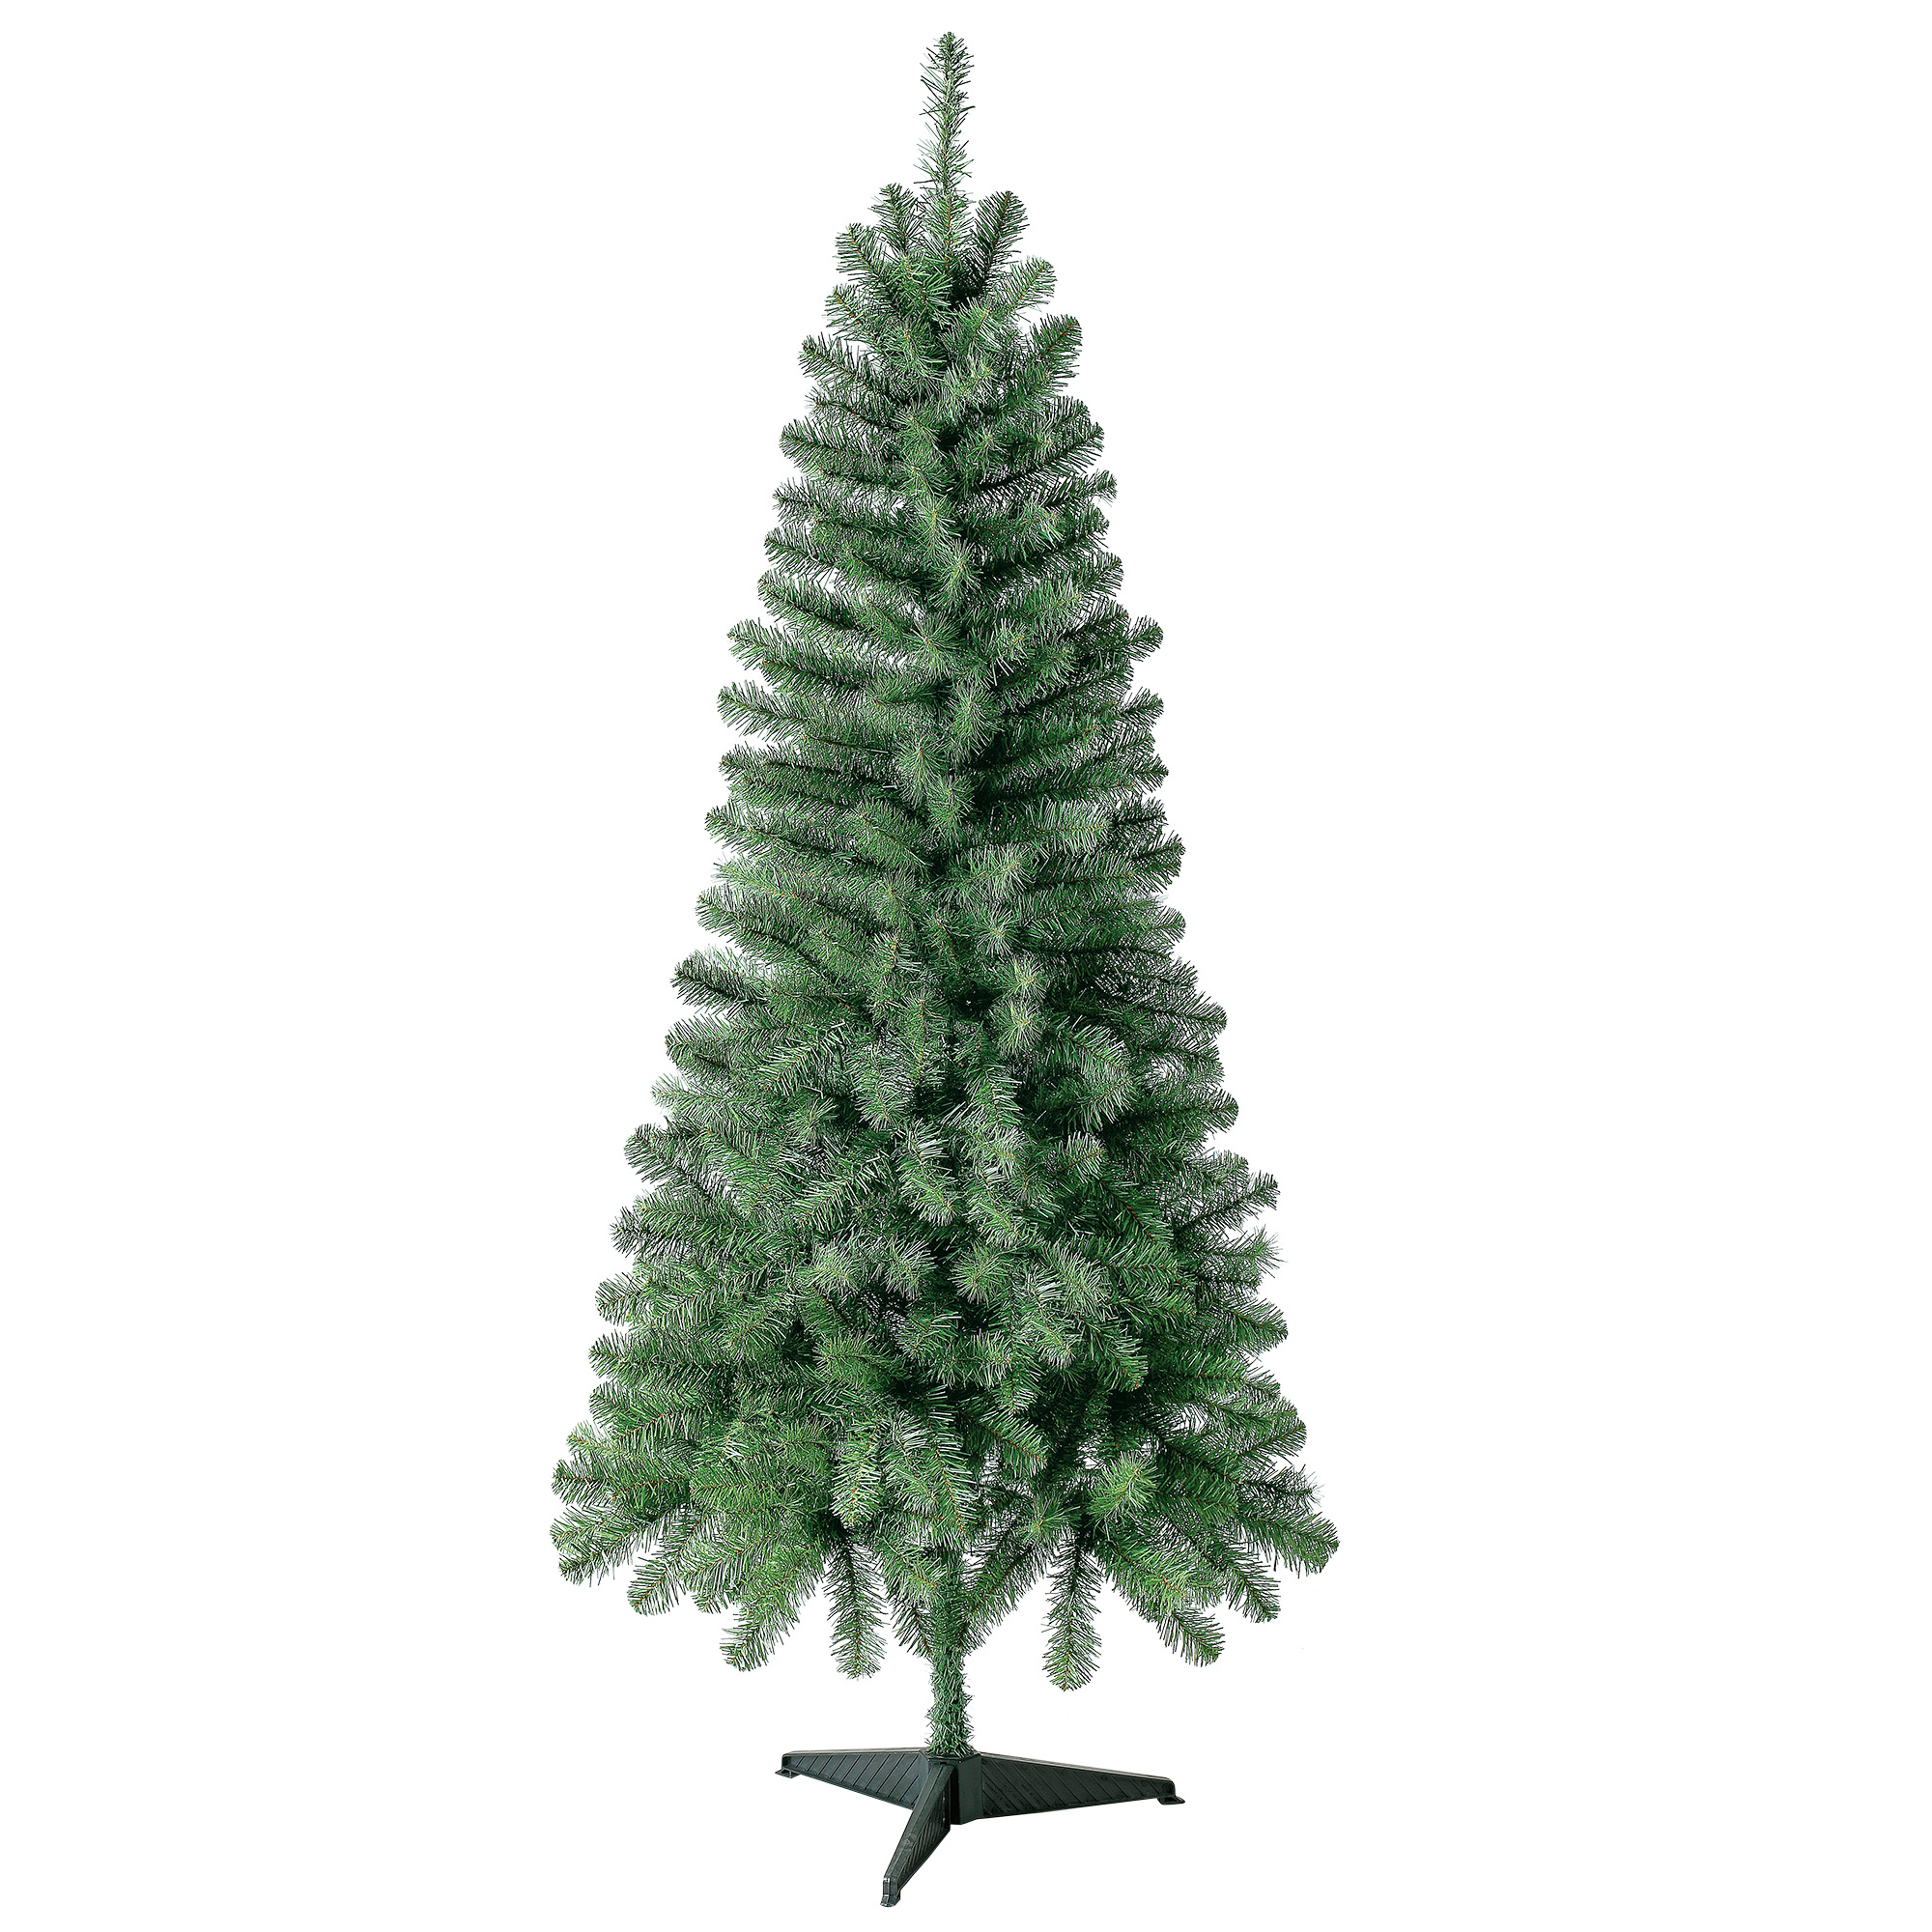 Holiday Time Non-Lit Wesley Pine Artificial Christmas Tree, 6' - image 1 of 6